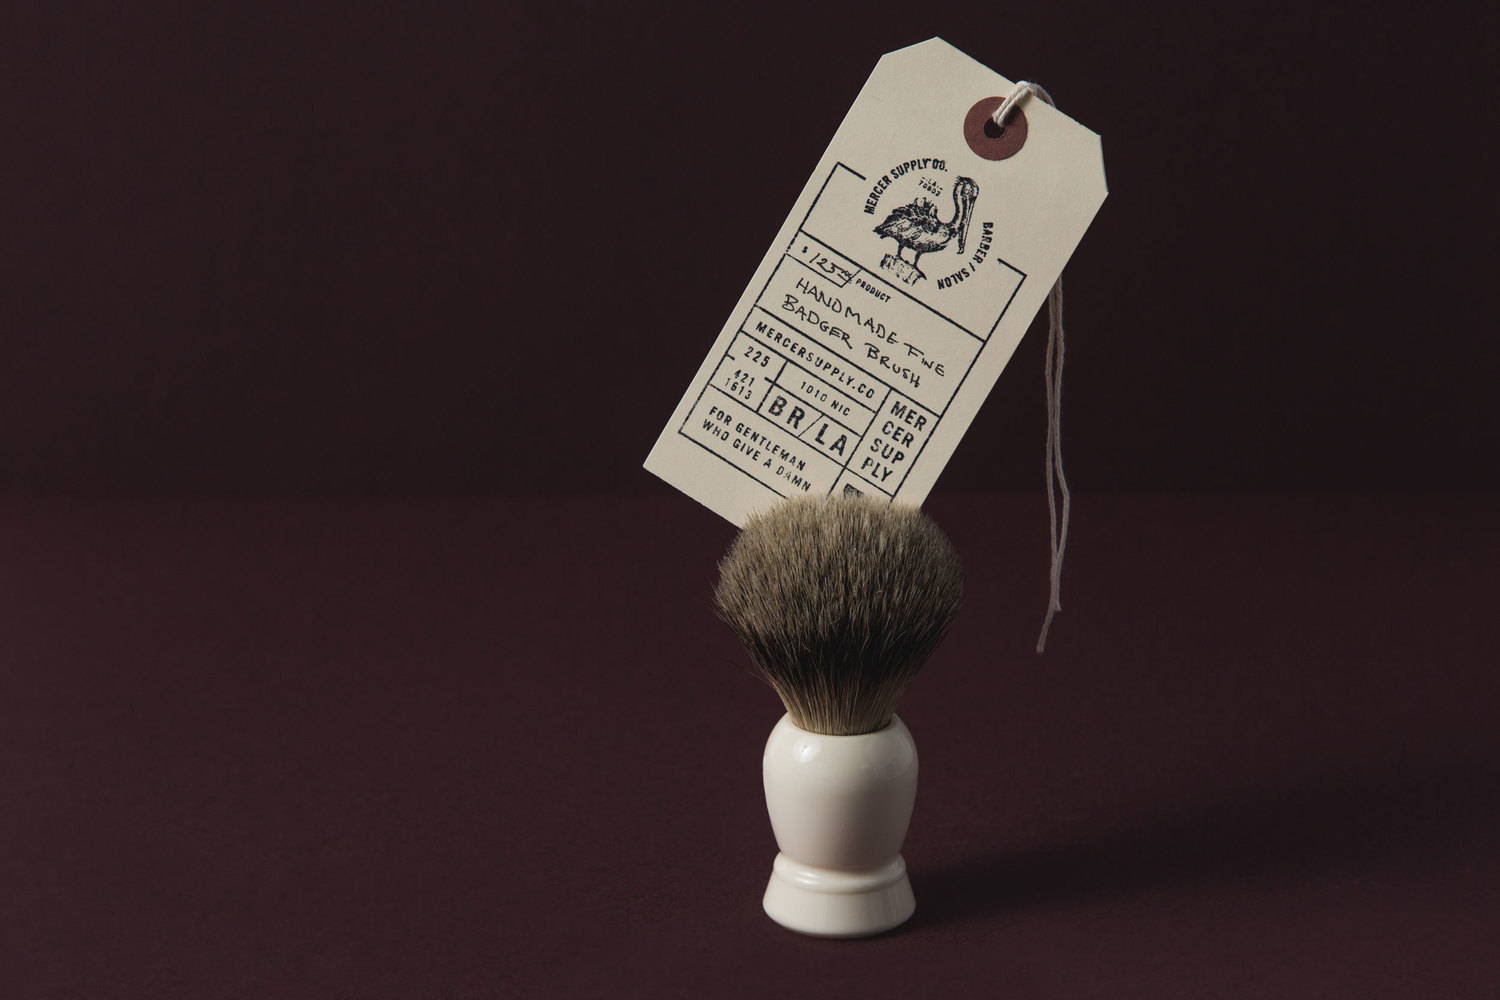 Branding for Tennessee salon and barber Mercer Supply Co. designed by Peck & Co.